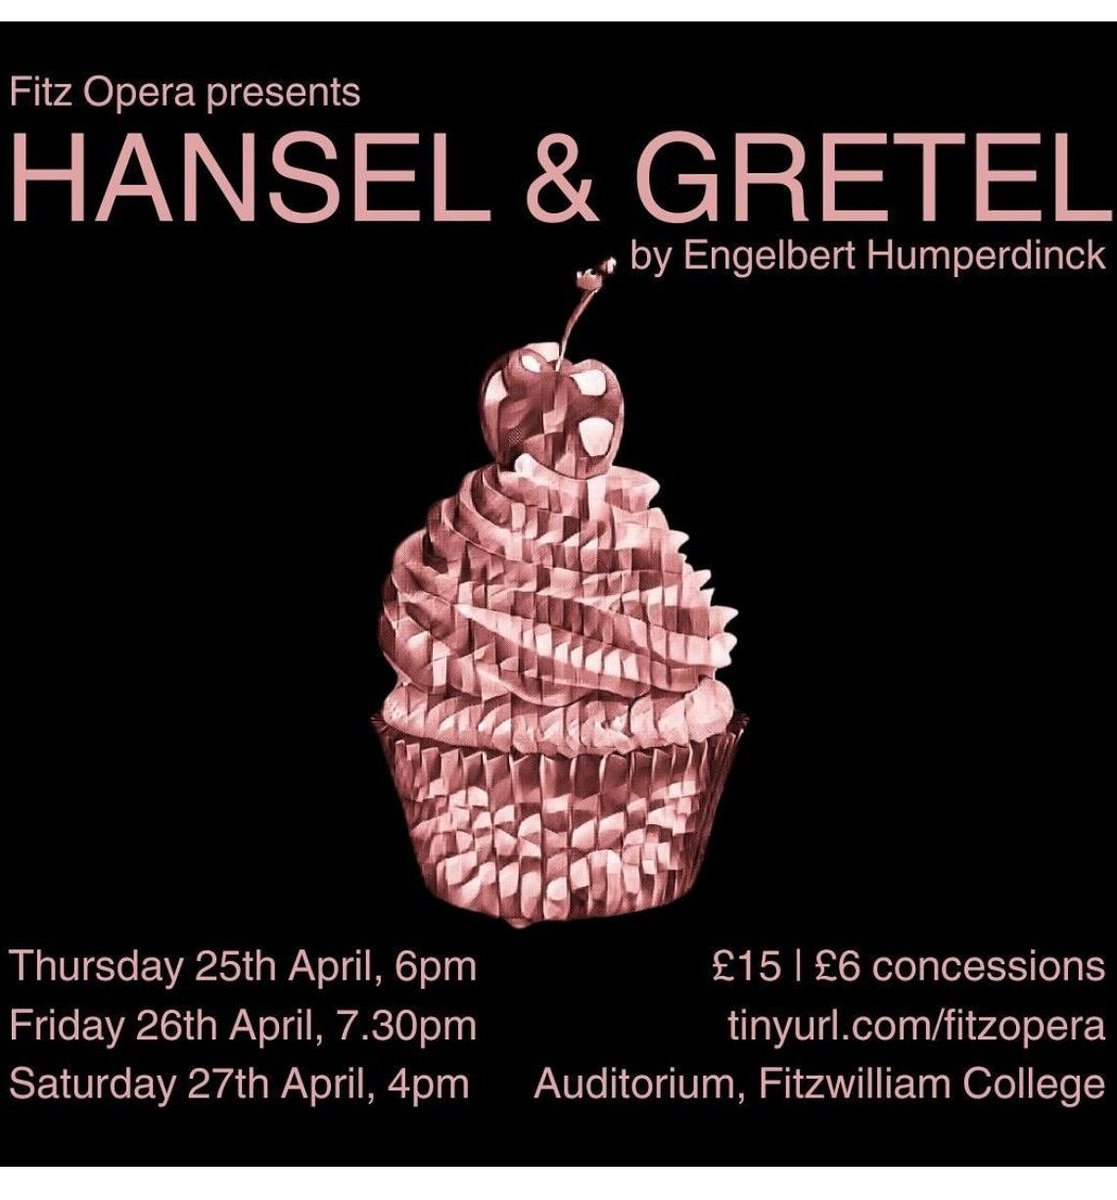 Roll up, roll up...have you bought your ticket for Hansel and Gretel, this year's Fitz Opera? Performances are on Thursday, Friday and Saturday, and you can book your seat here: buff.ly/49R2JTh